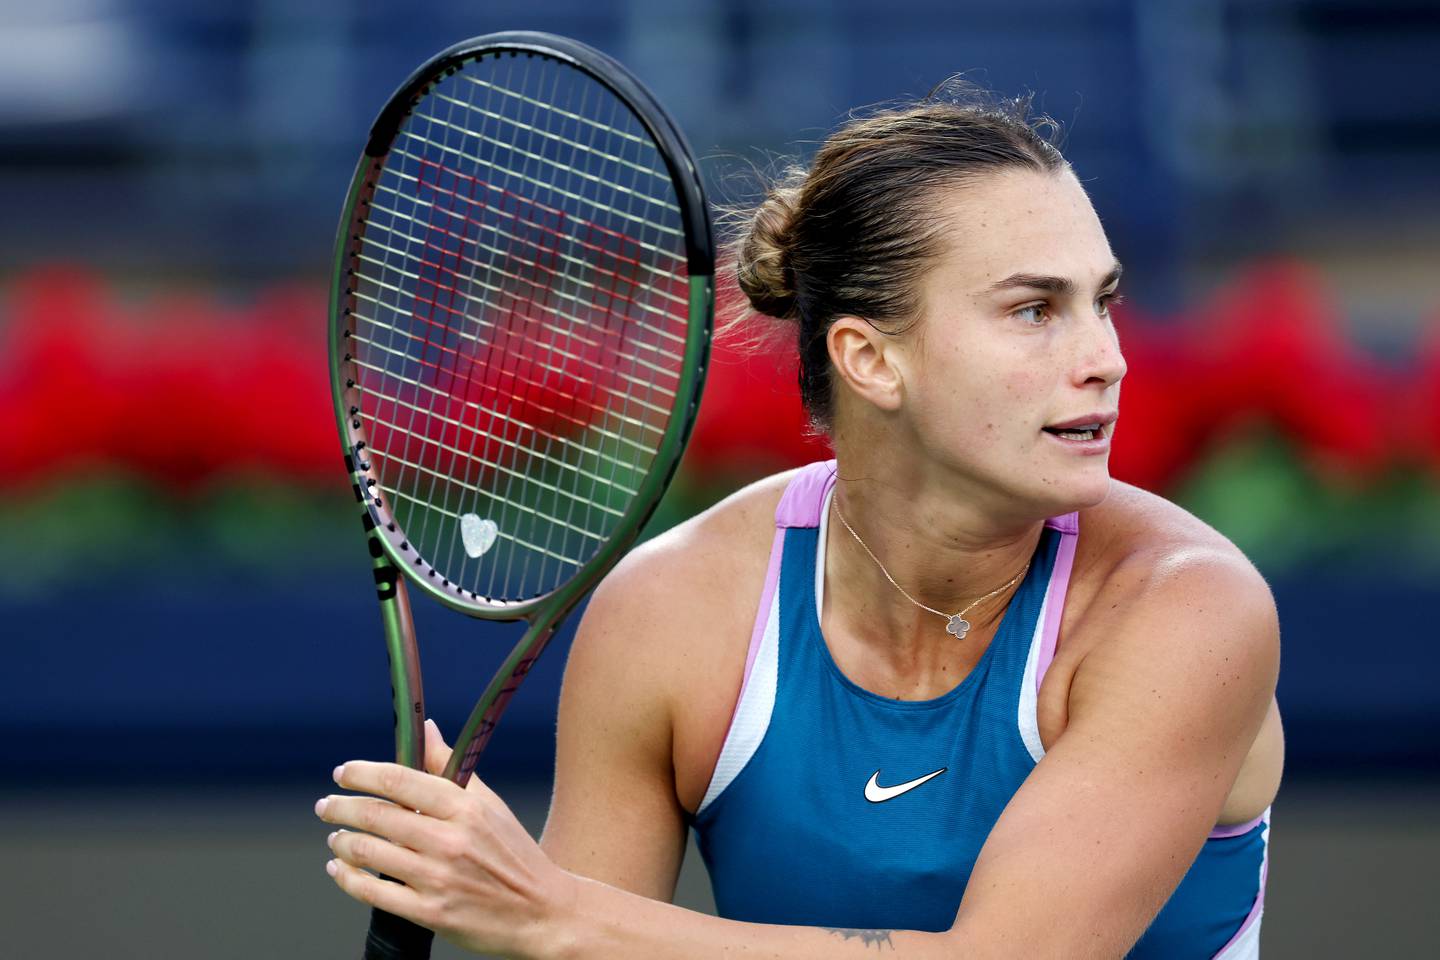 DUBAI, UNITED ARAB EMIRATES - FEBRUARY 21: Aryna Sabalenka looks on while playing against Lauren Davis of the USA during her women's singles match on day three of the Dubai Duty Free Tennis at Dubai Duty Free Tennis Stadium on February 21, 2023 in Dubai, United Arab Emirates. (Photo by Christopher Pike / Getty Images)